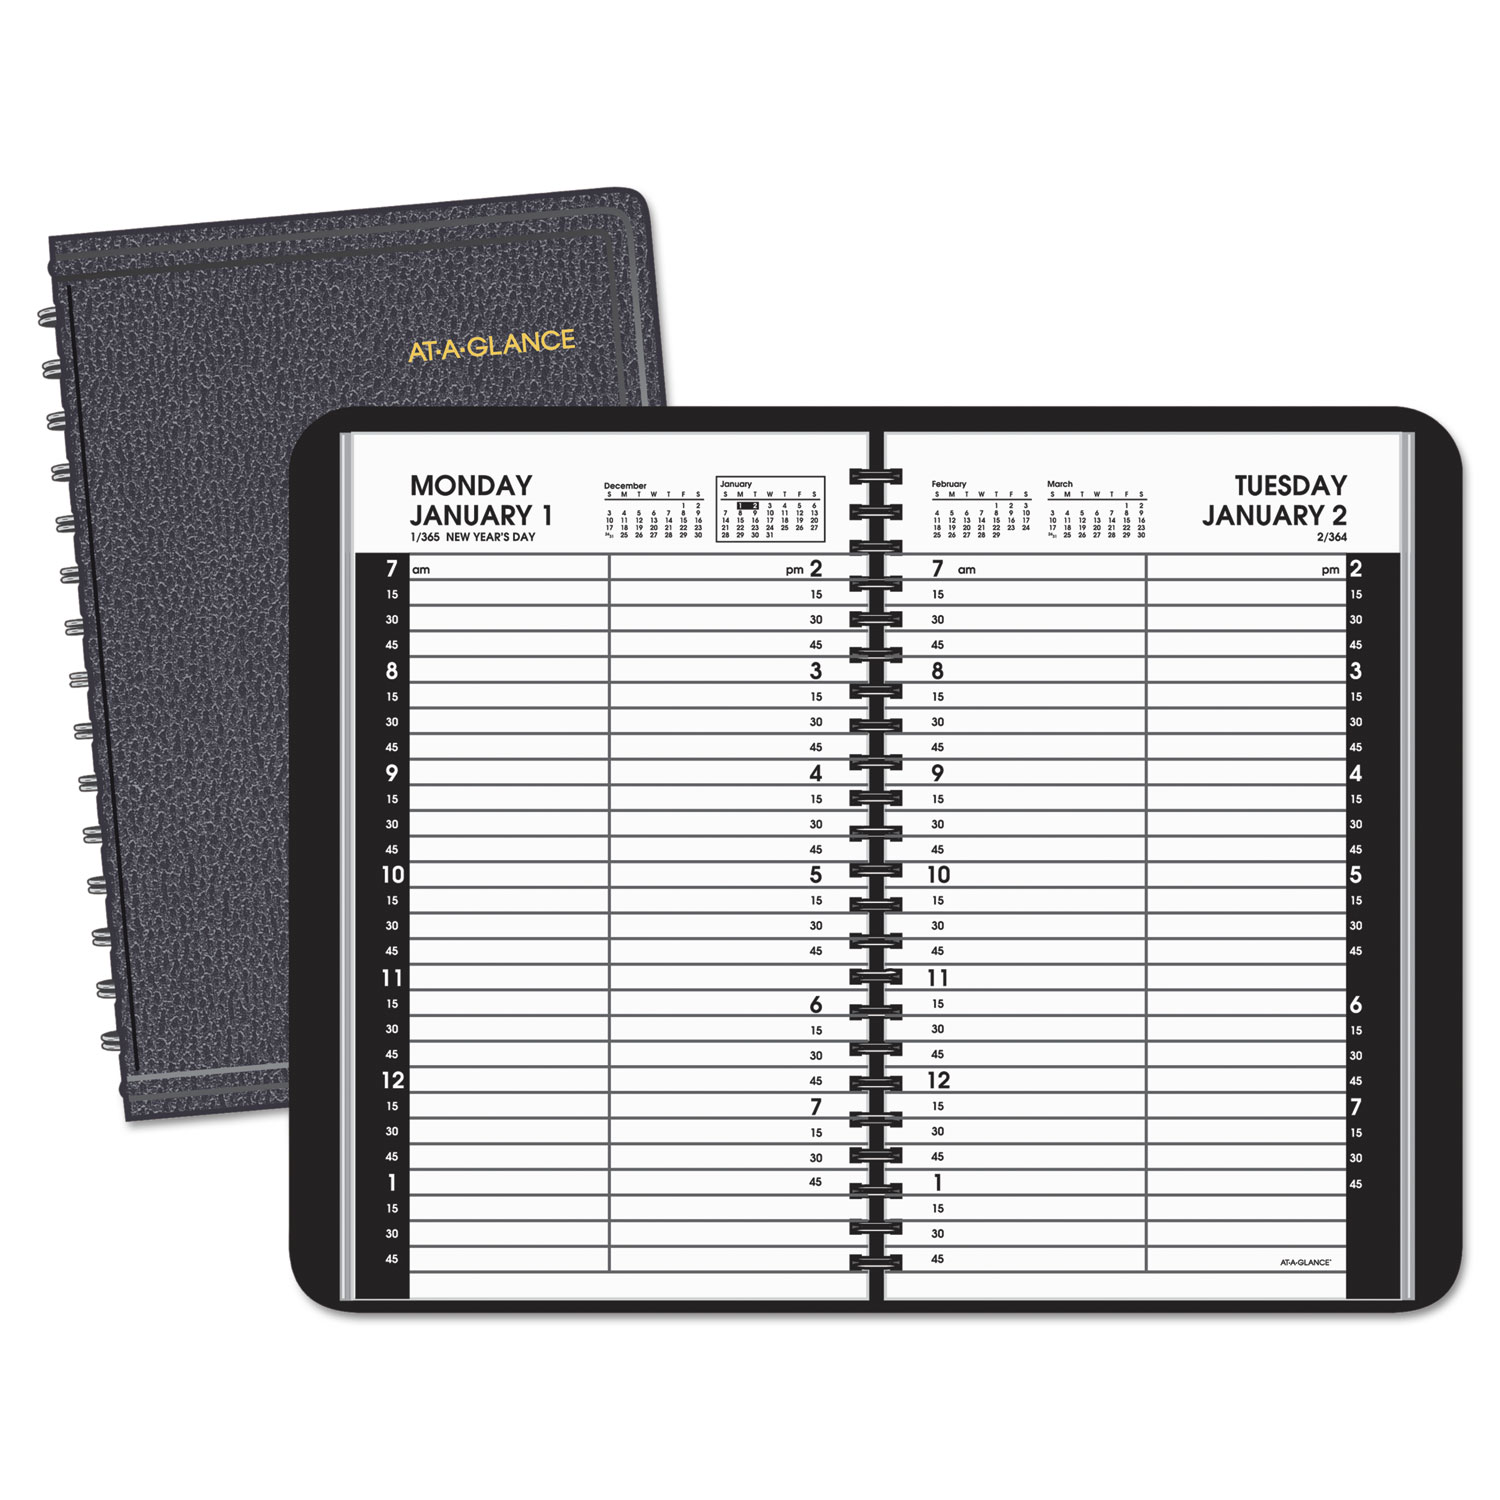 AT-A-GLANCE AAG7080005 Daily Appointment Book with 15-Minute Appointments, 8 x 4 7/8, Black, 2017